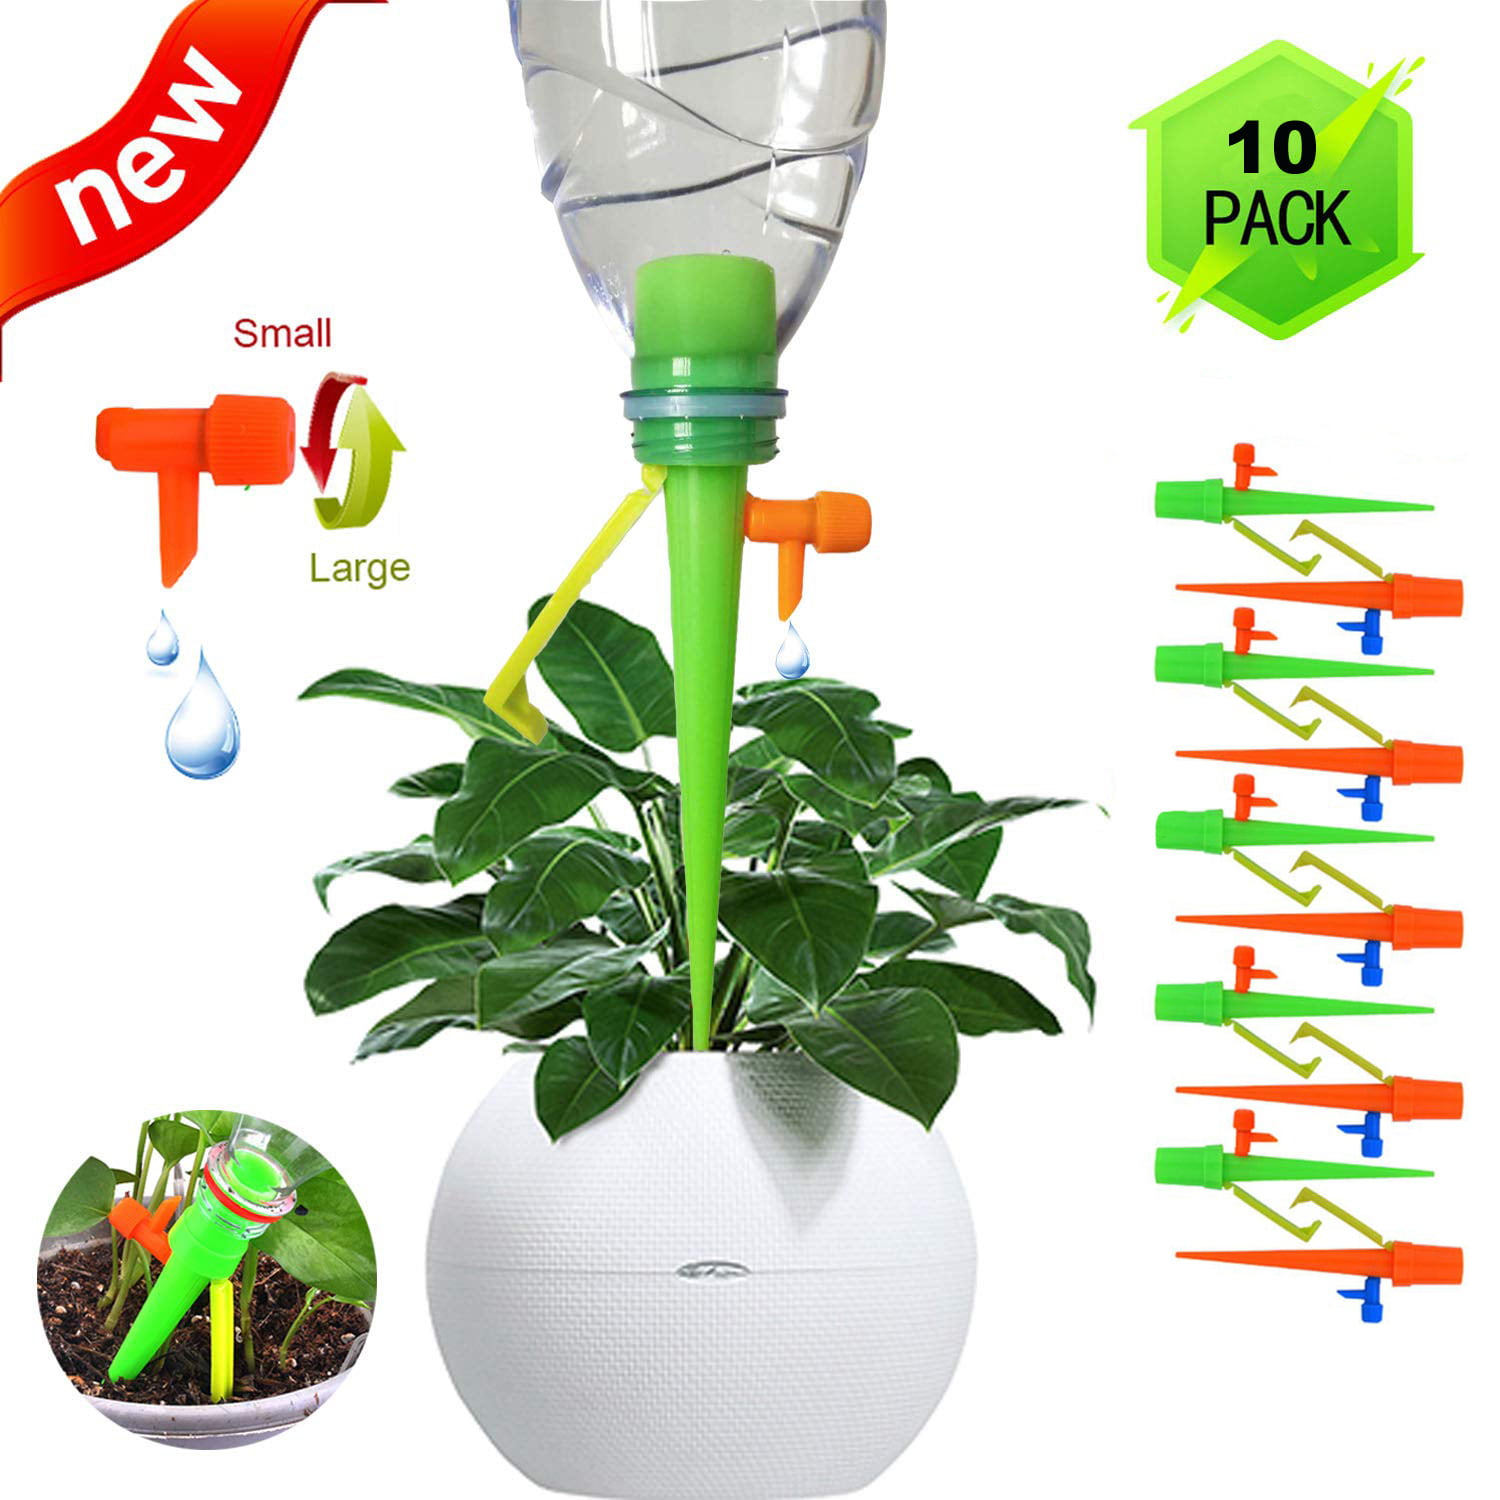 Automatic Watering System Plant Waterer Drip Irrigation Self Watering Spike 